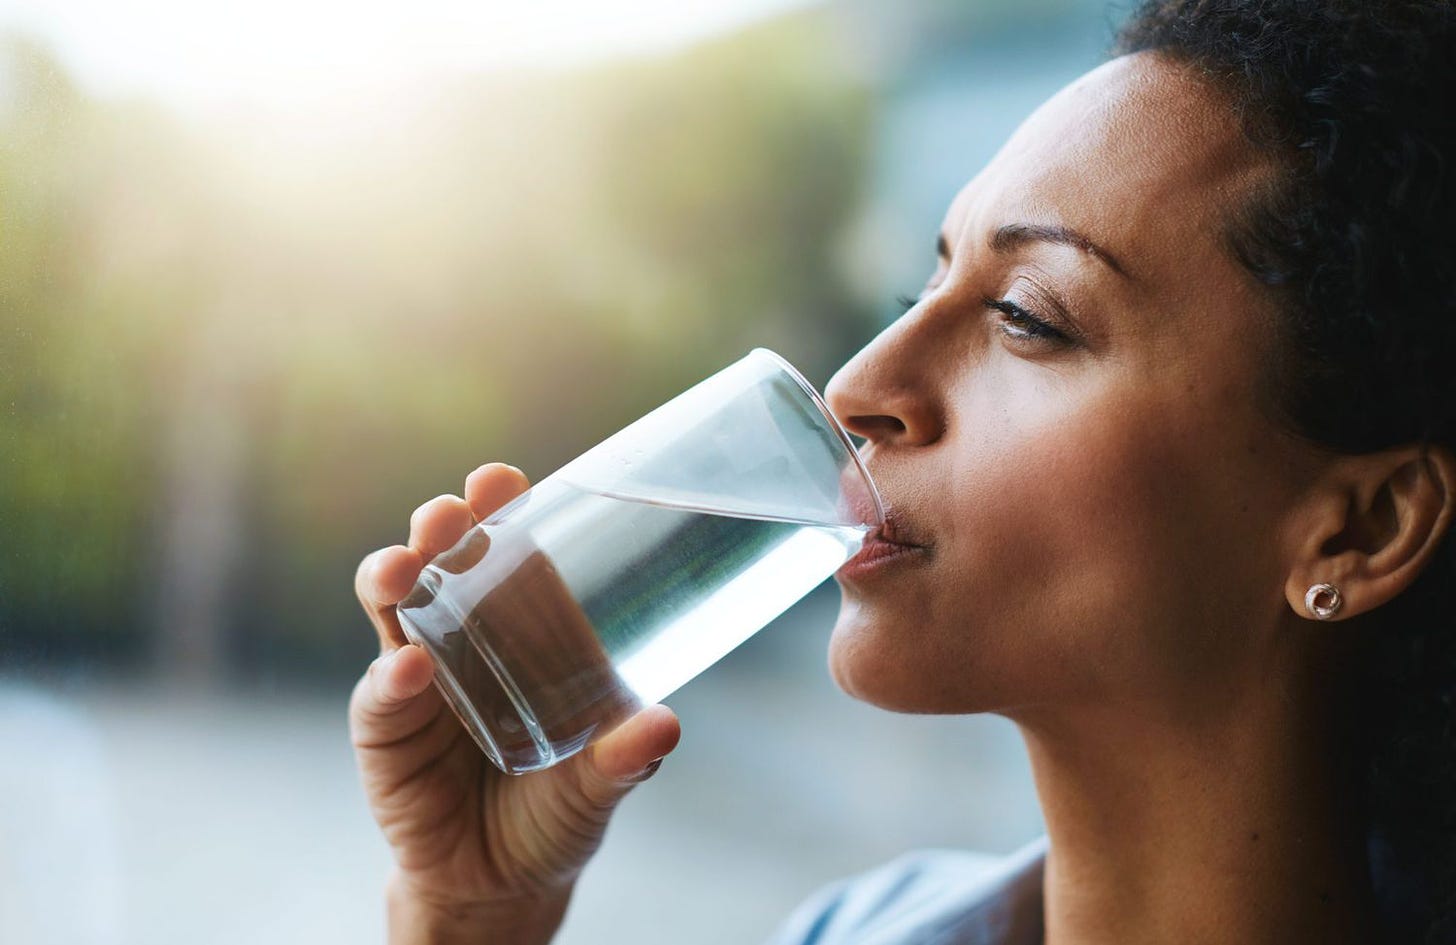 Does Drinking More Water Really Lead to Better Skin?